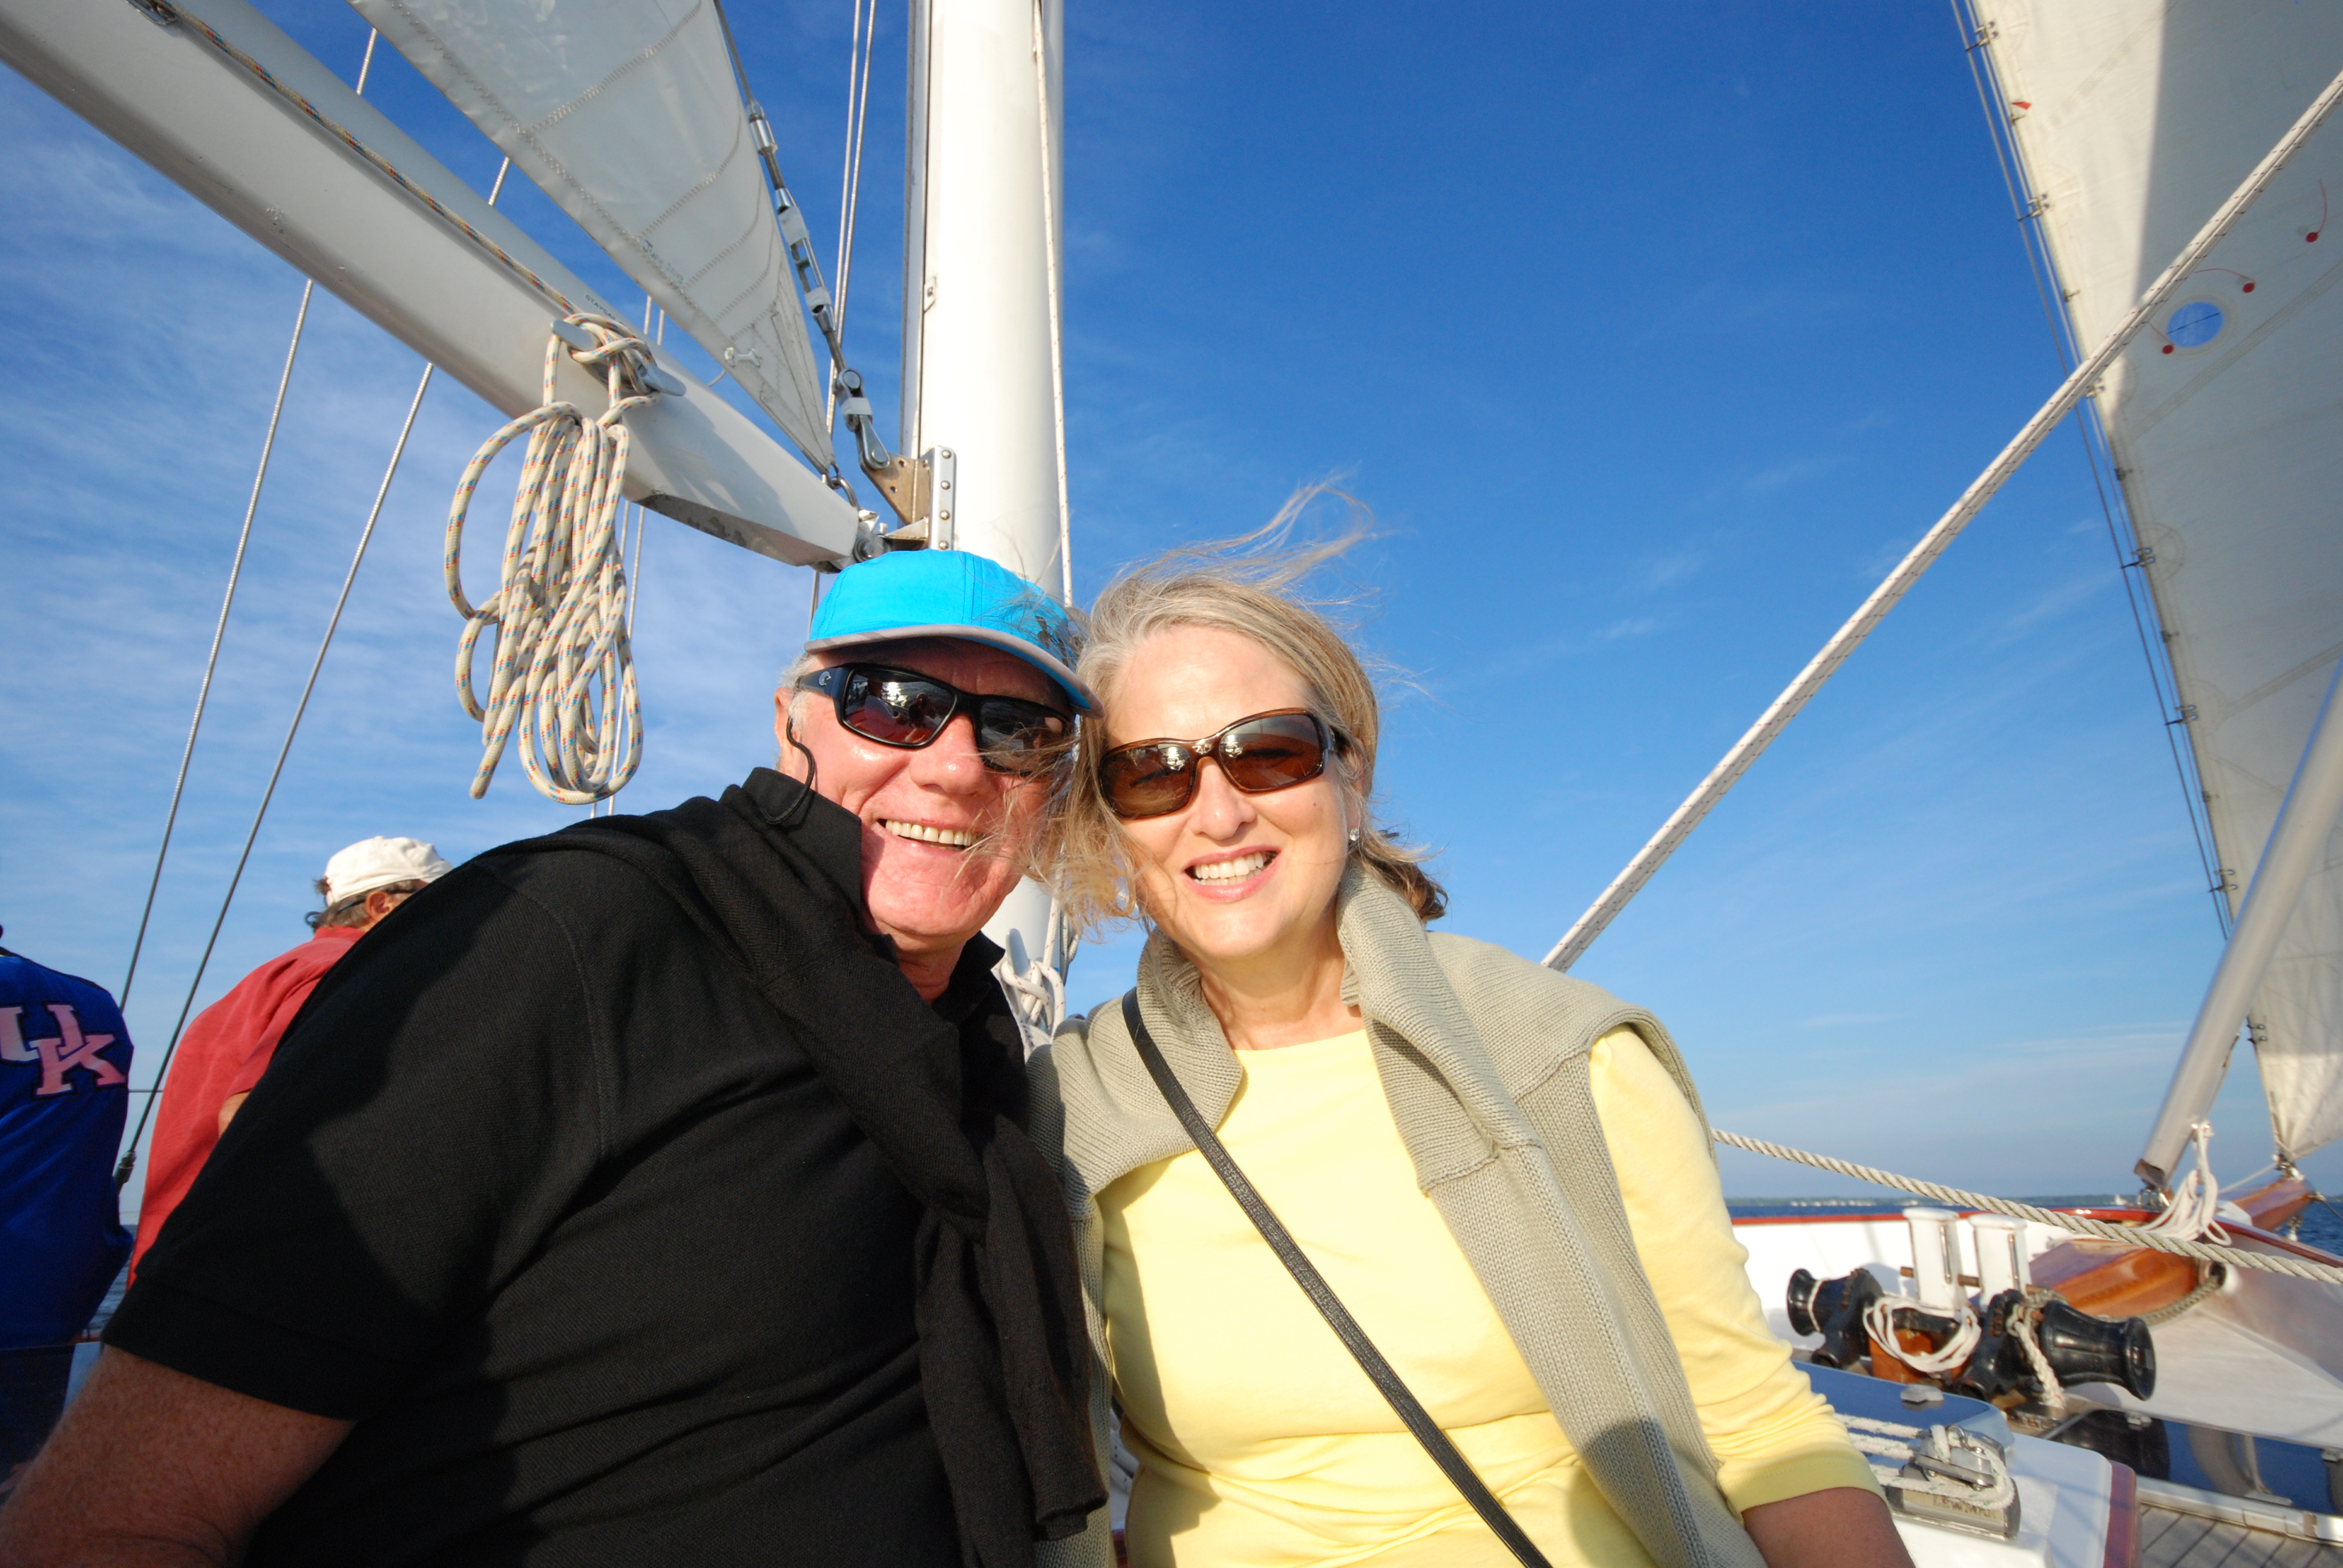 Man and women smiling on a sunny blue sky sail